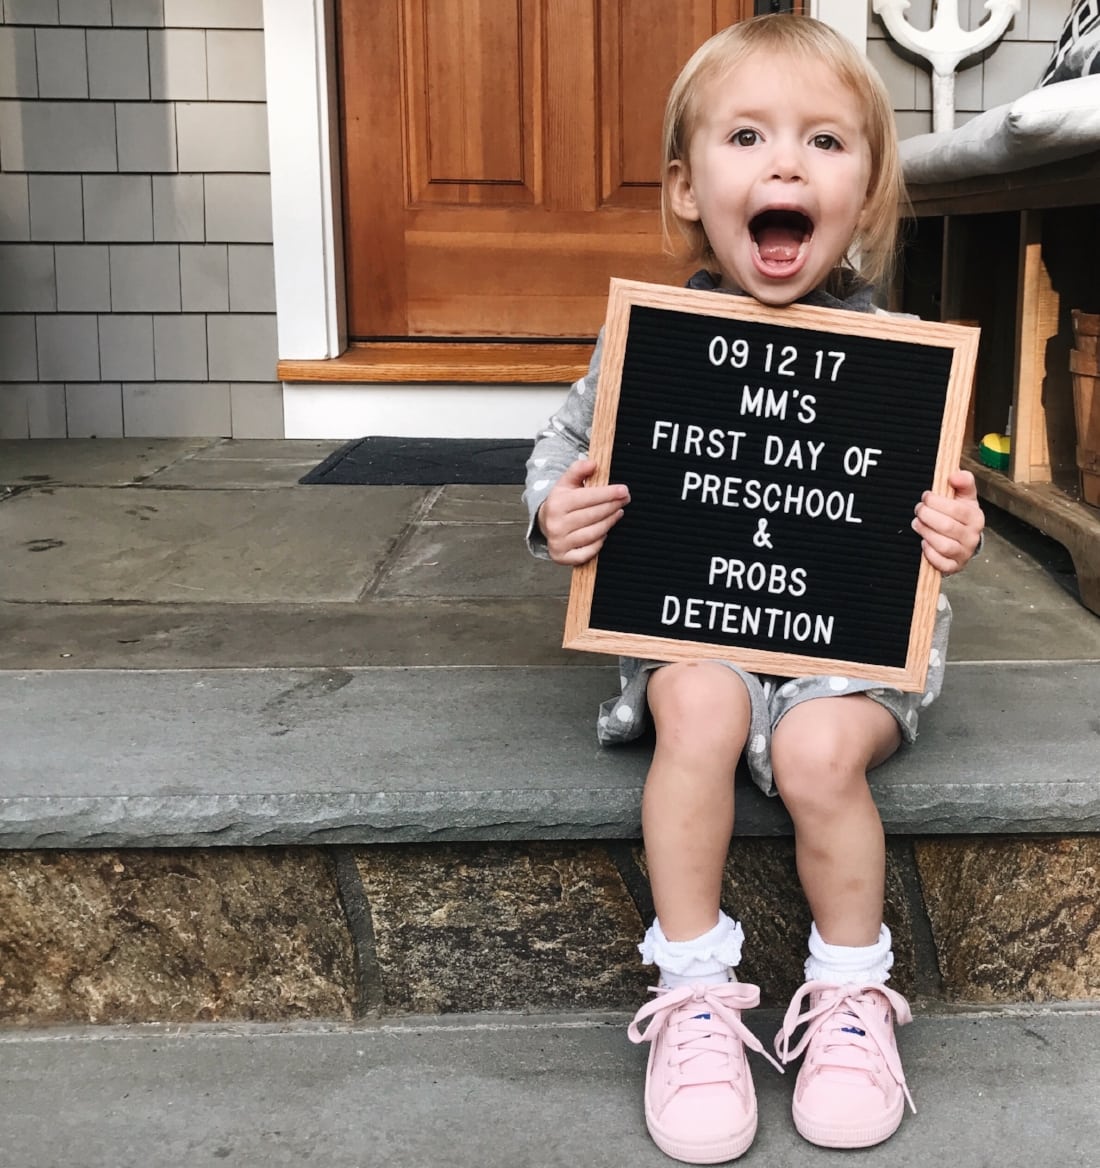 Little girl sitting on her first step holding up a letter board on her first day of preschool.